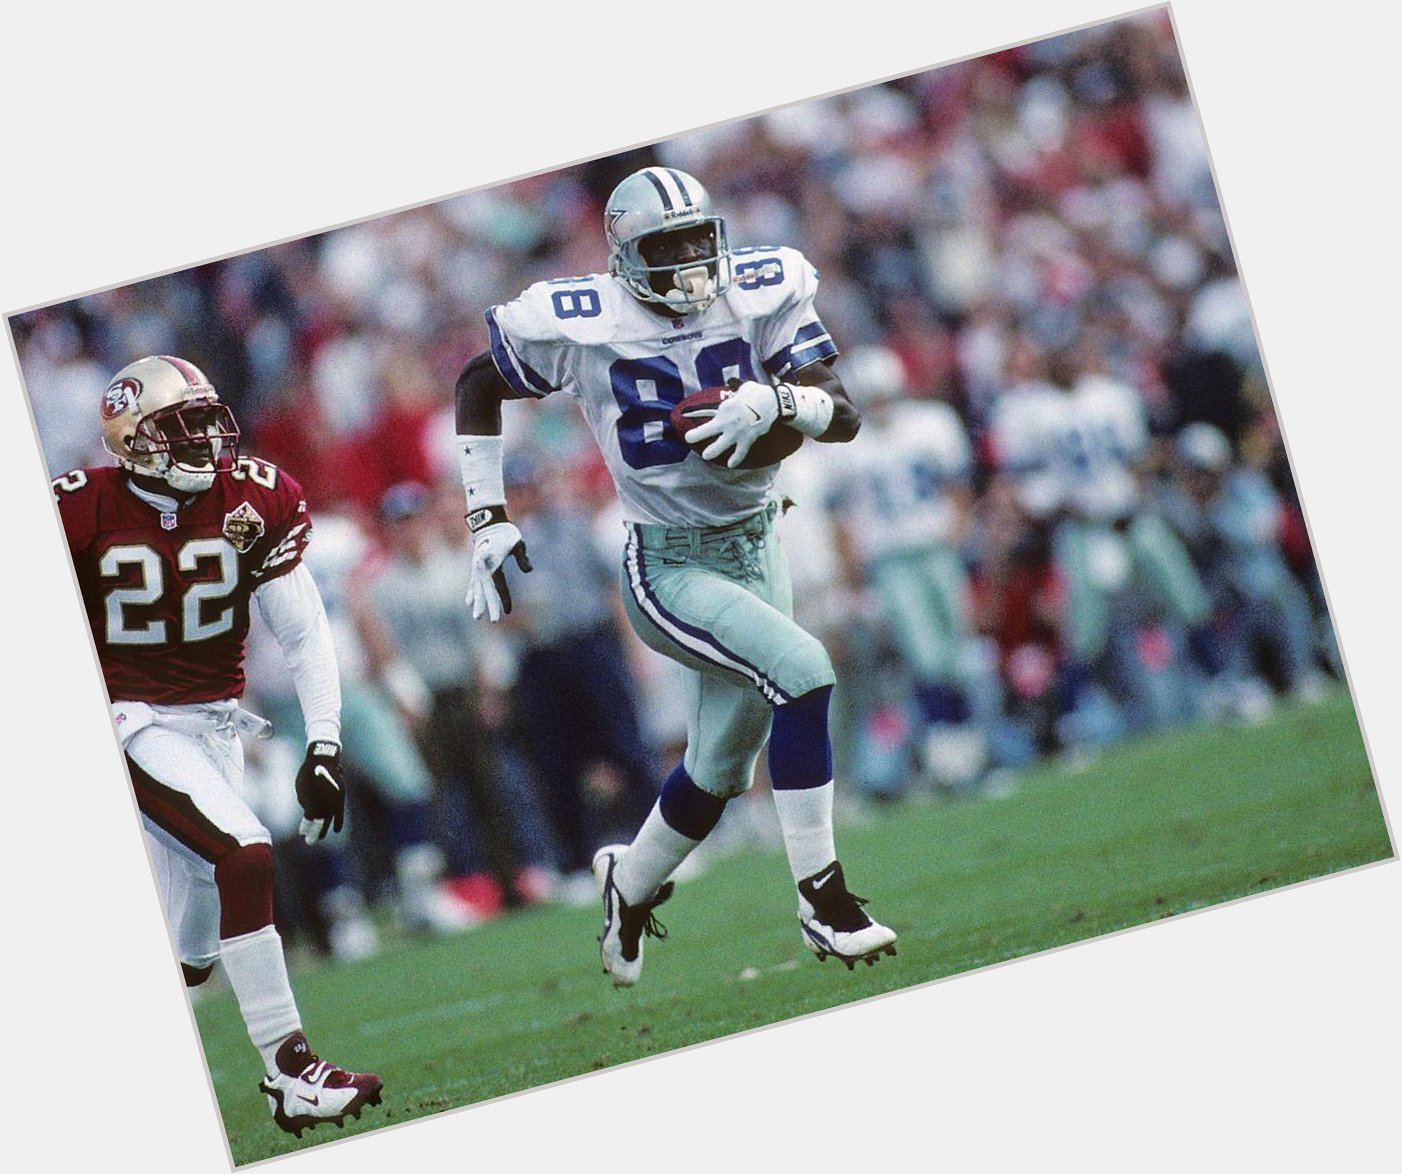 Happy Birthday to Michael Irvin, who turns 49 today! 